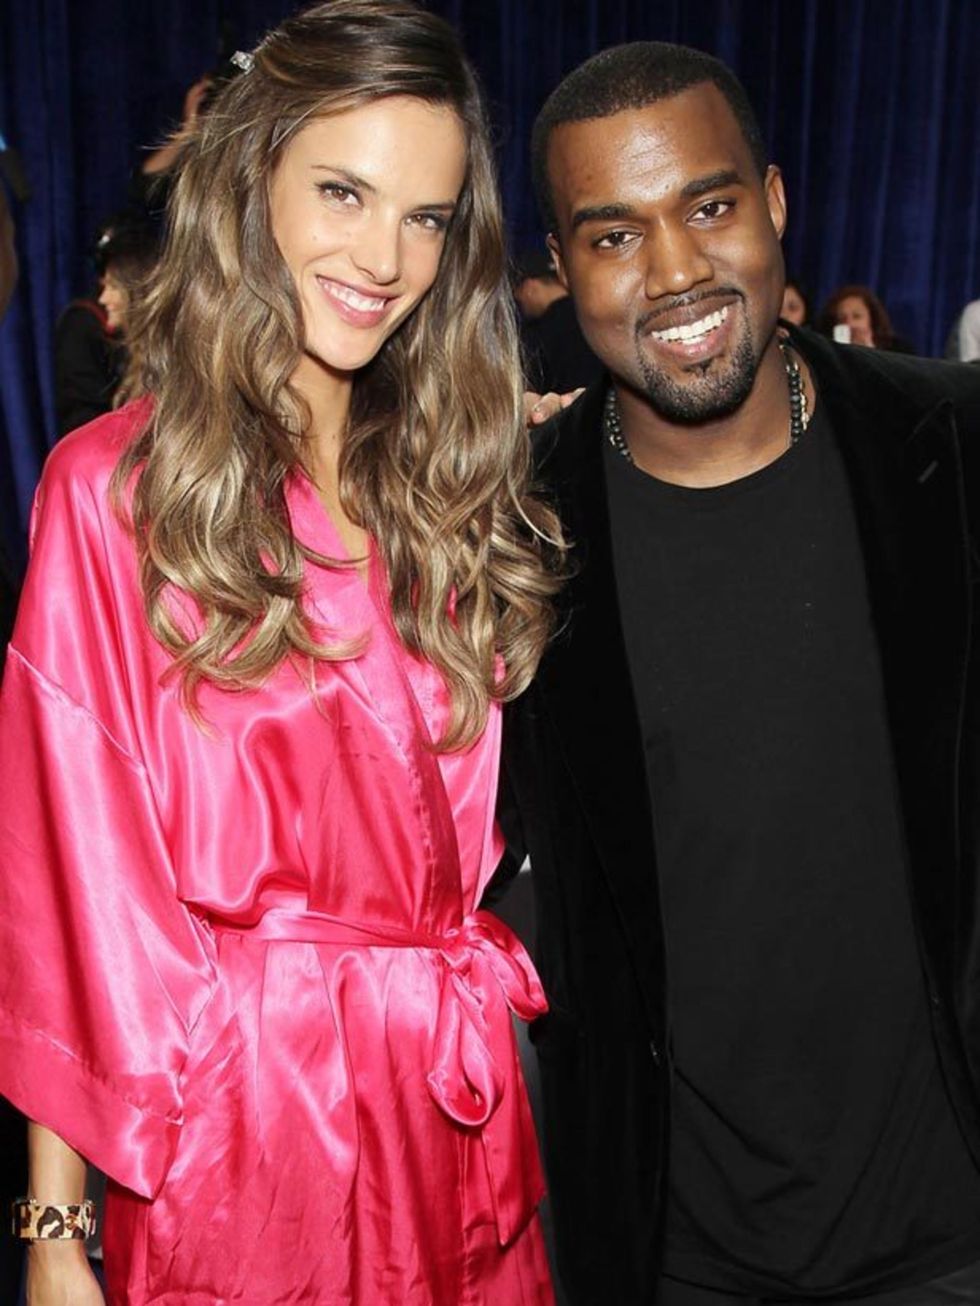 <p><a href="http://www.elleuk.com/starstyle/style-files/(section)/alessandra-ambrosio">Alessandra Ambrosio</a> &amp; <a href="http://www.elleuk.com/catwalk/collections/kanye-west/">Kanye West</a> backstage at the <a href="http://www.elleuk.com/content/sea